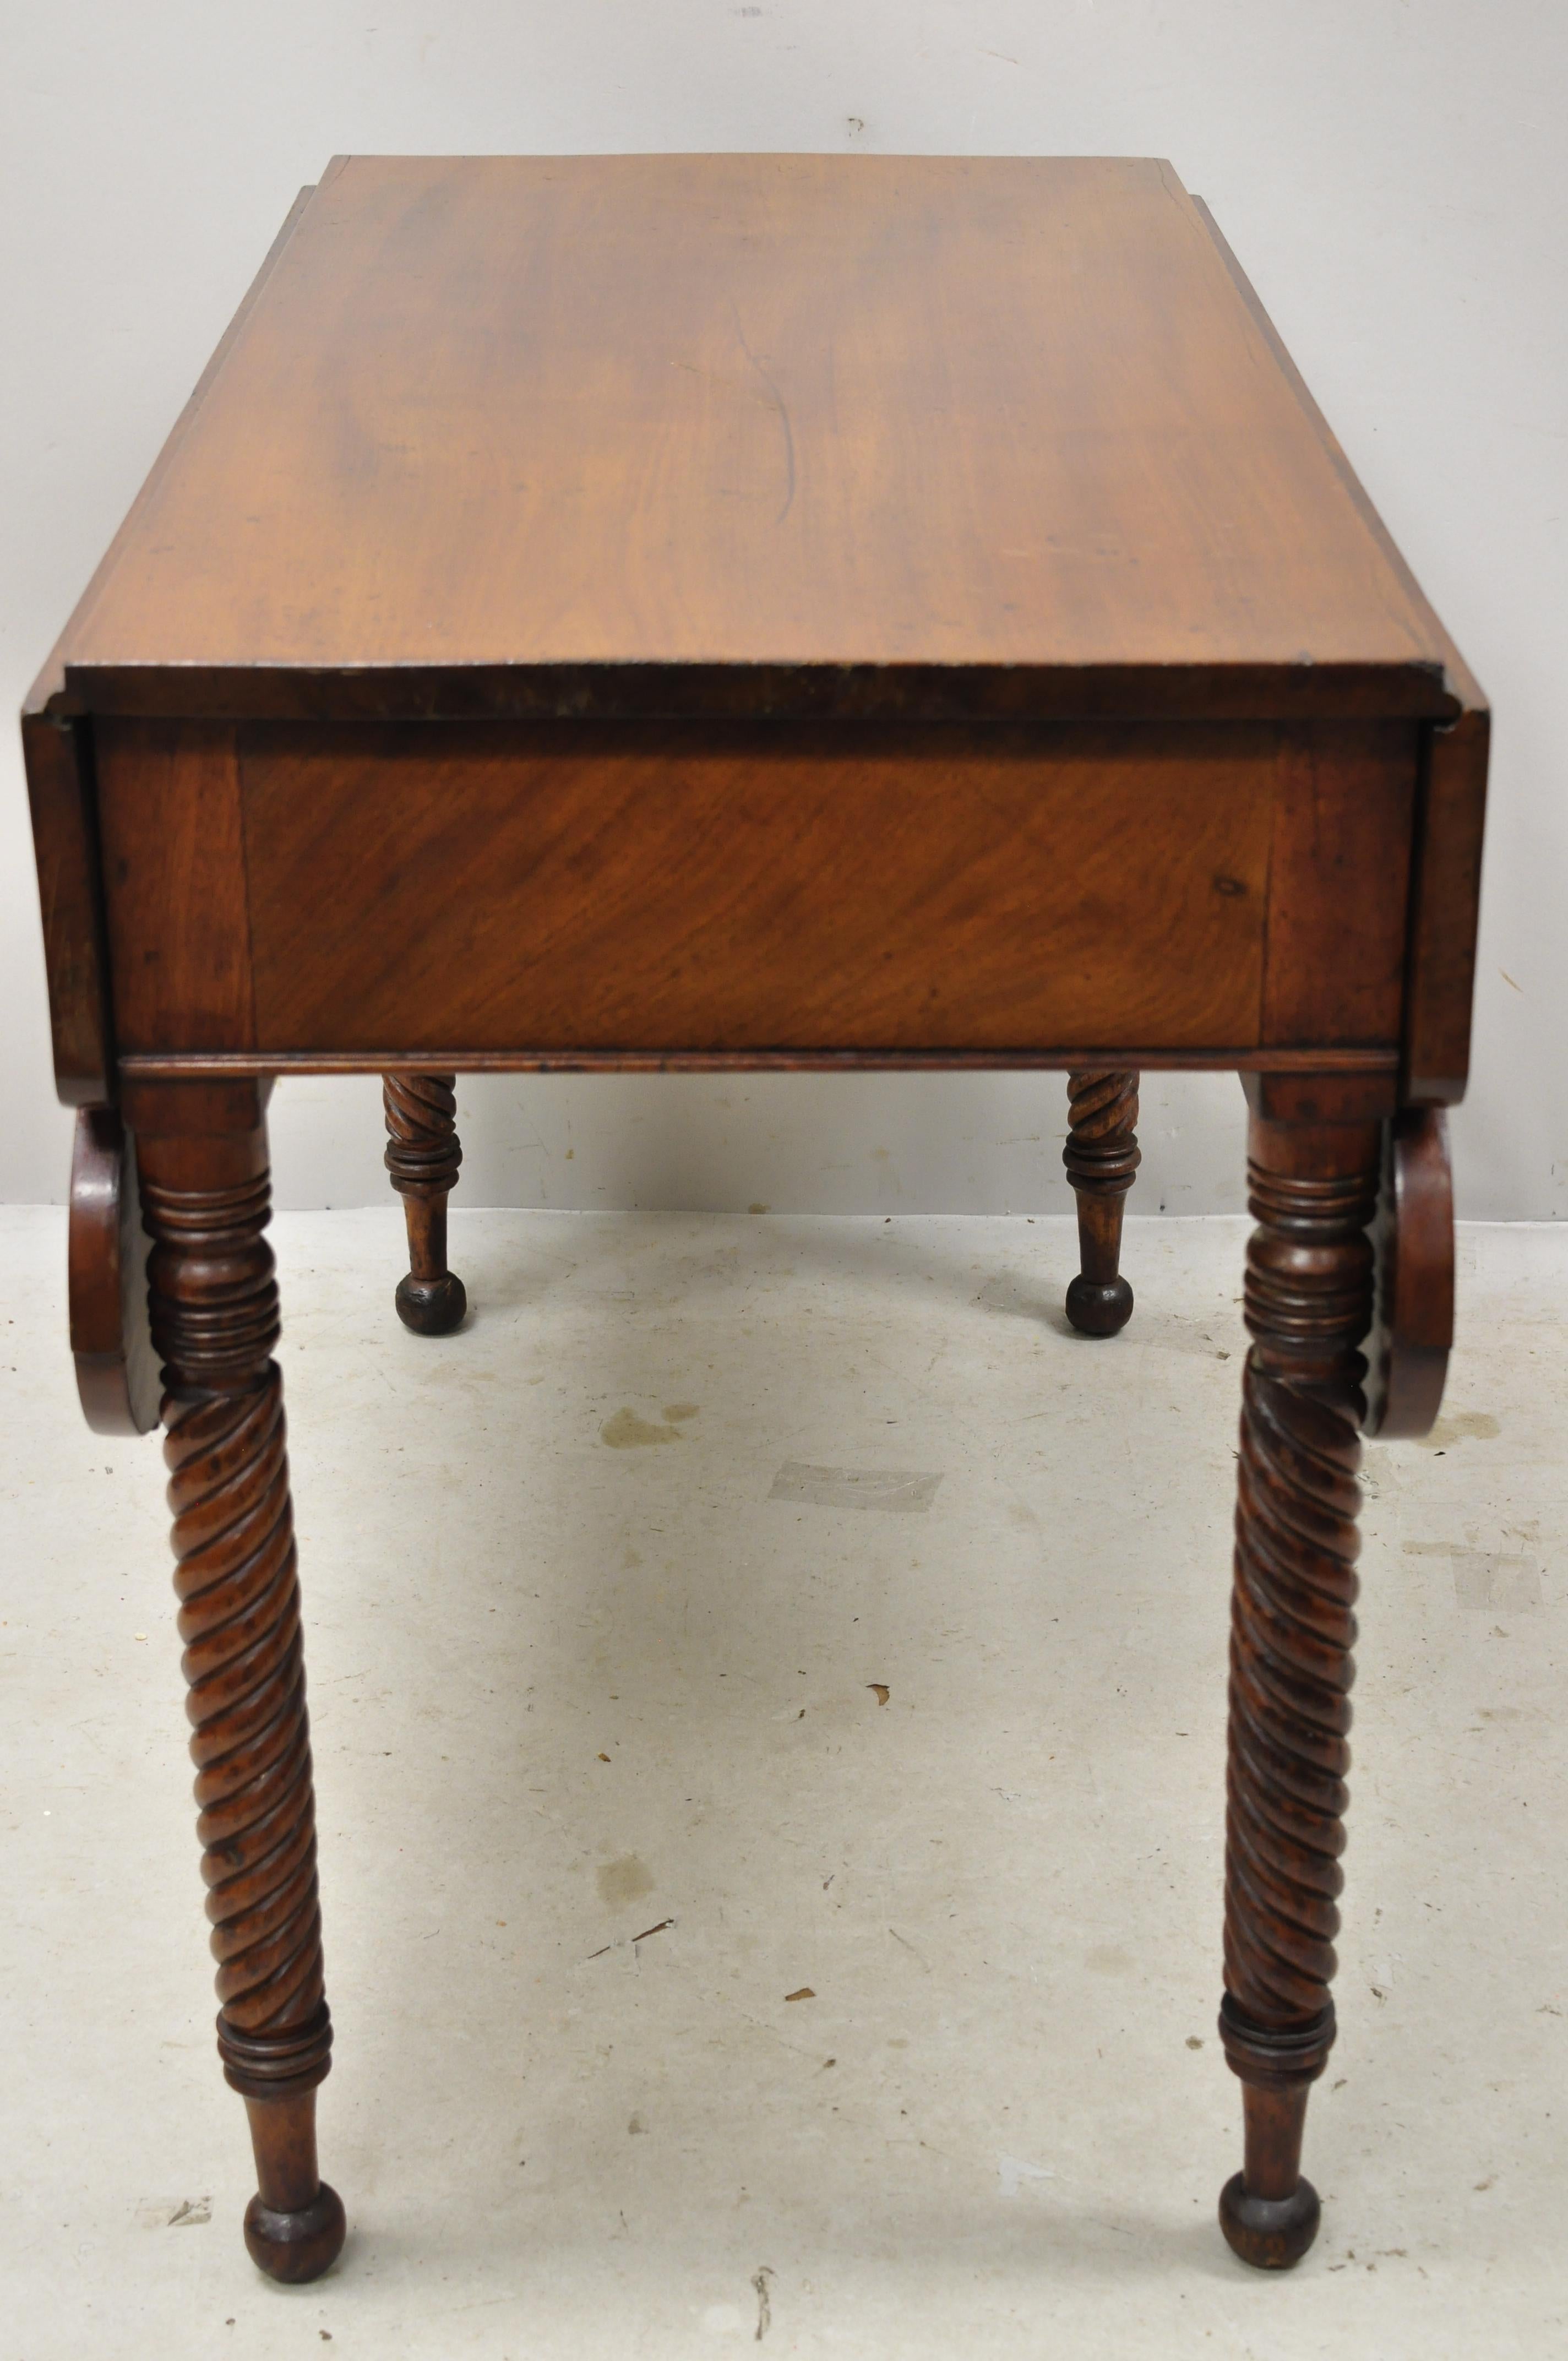 19th Century Scallop Carved Drop Leaf Mahogany Breakfast Dining Table 1-Drawer 6